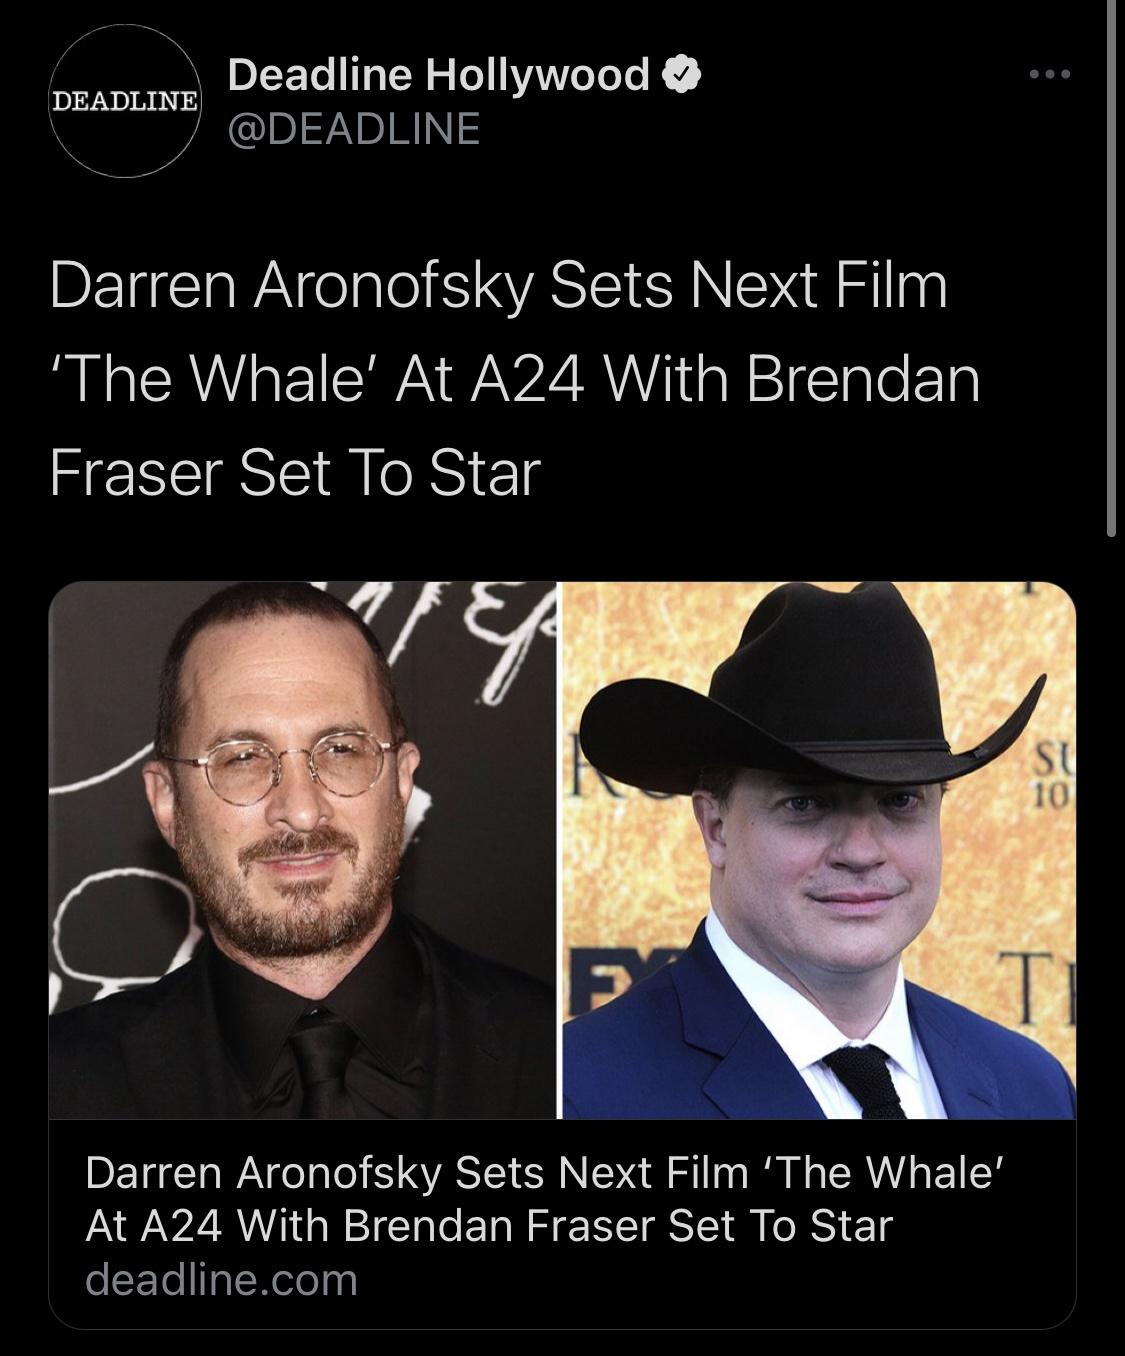 photo caption - Deadline Deadline Hollywood Darren Aronofsky Sets Next Film 'The Whale' At A24 With Brendan Fraser Set To Star E Su 10 3 T Darren Aronofsky Sets Next Film 'The Whale' At A24 With Brendan Fraser Set To Star deadline.com